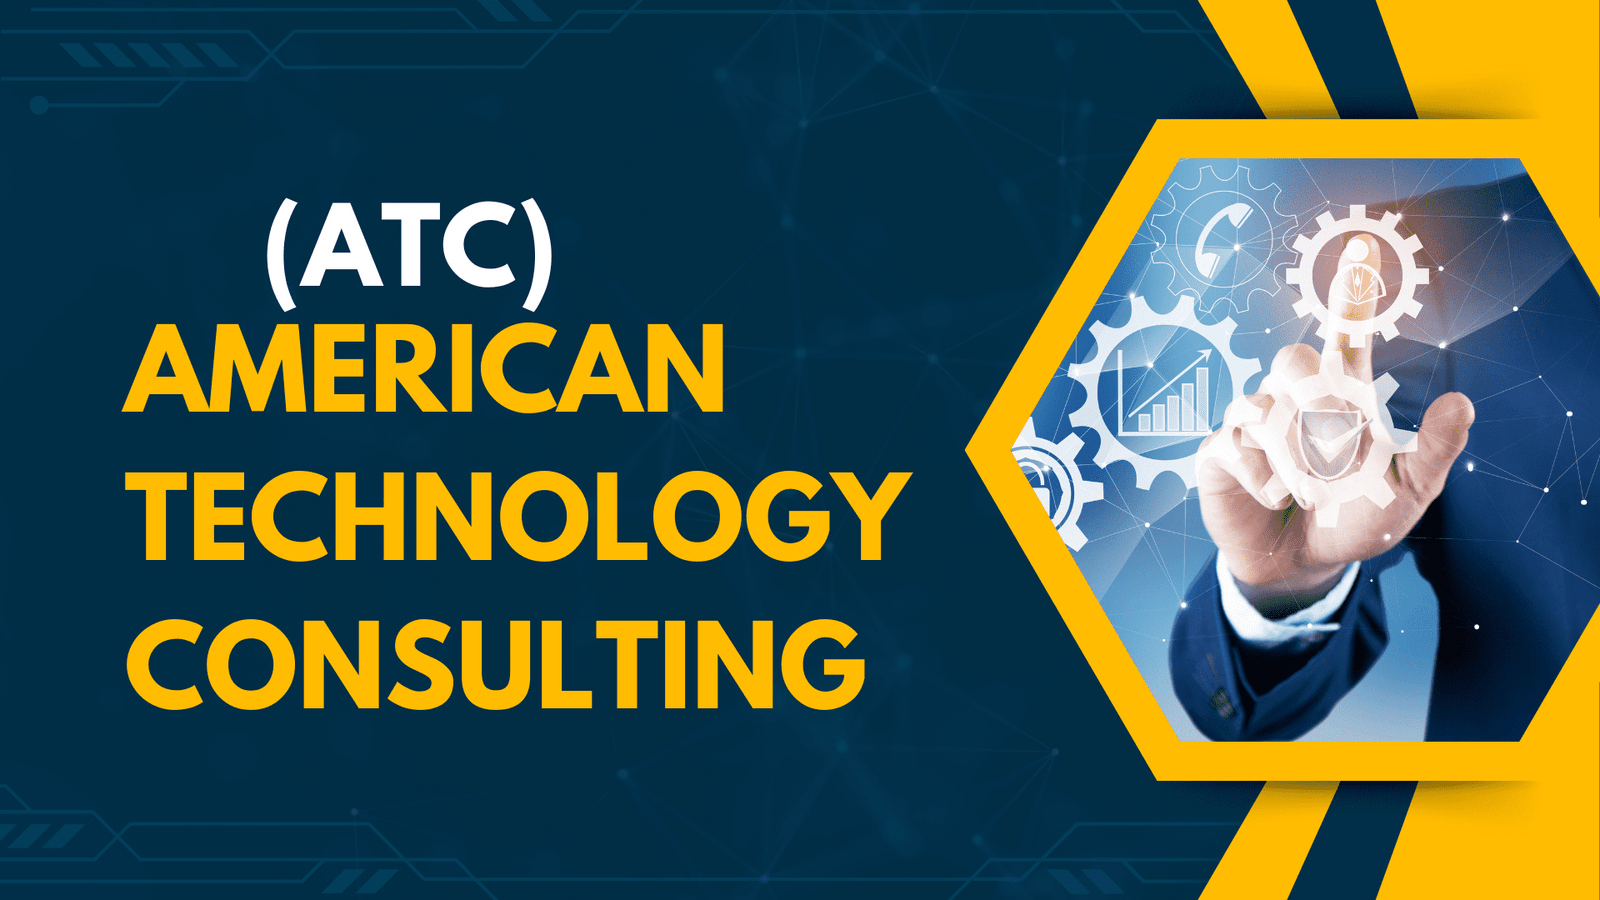 American Technology Consulting also known as ATC with best tech features. It provides various techniques to build and grow a business with the help of technology.